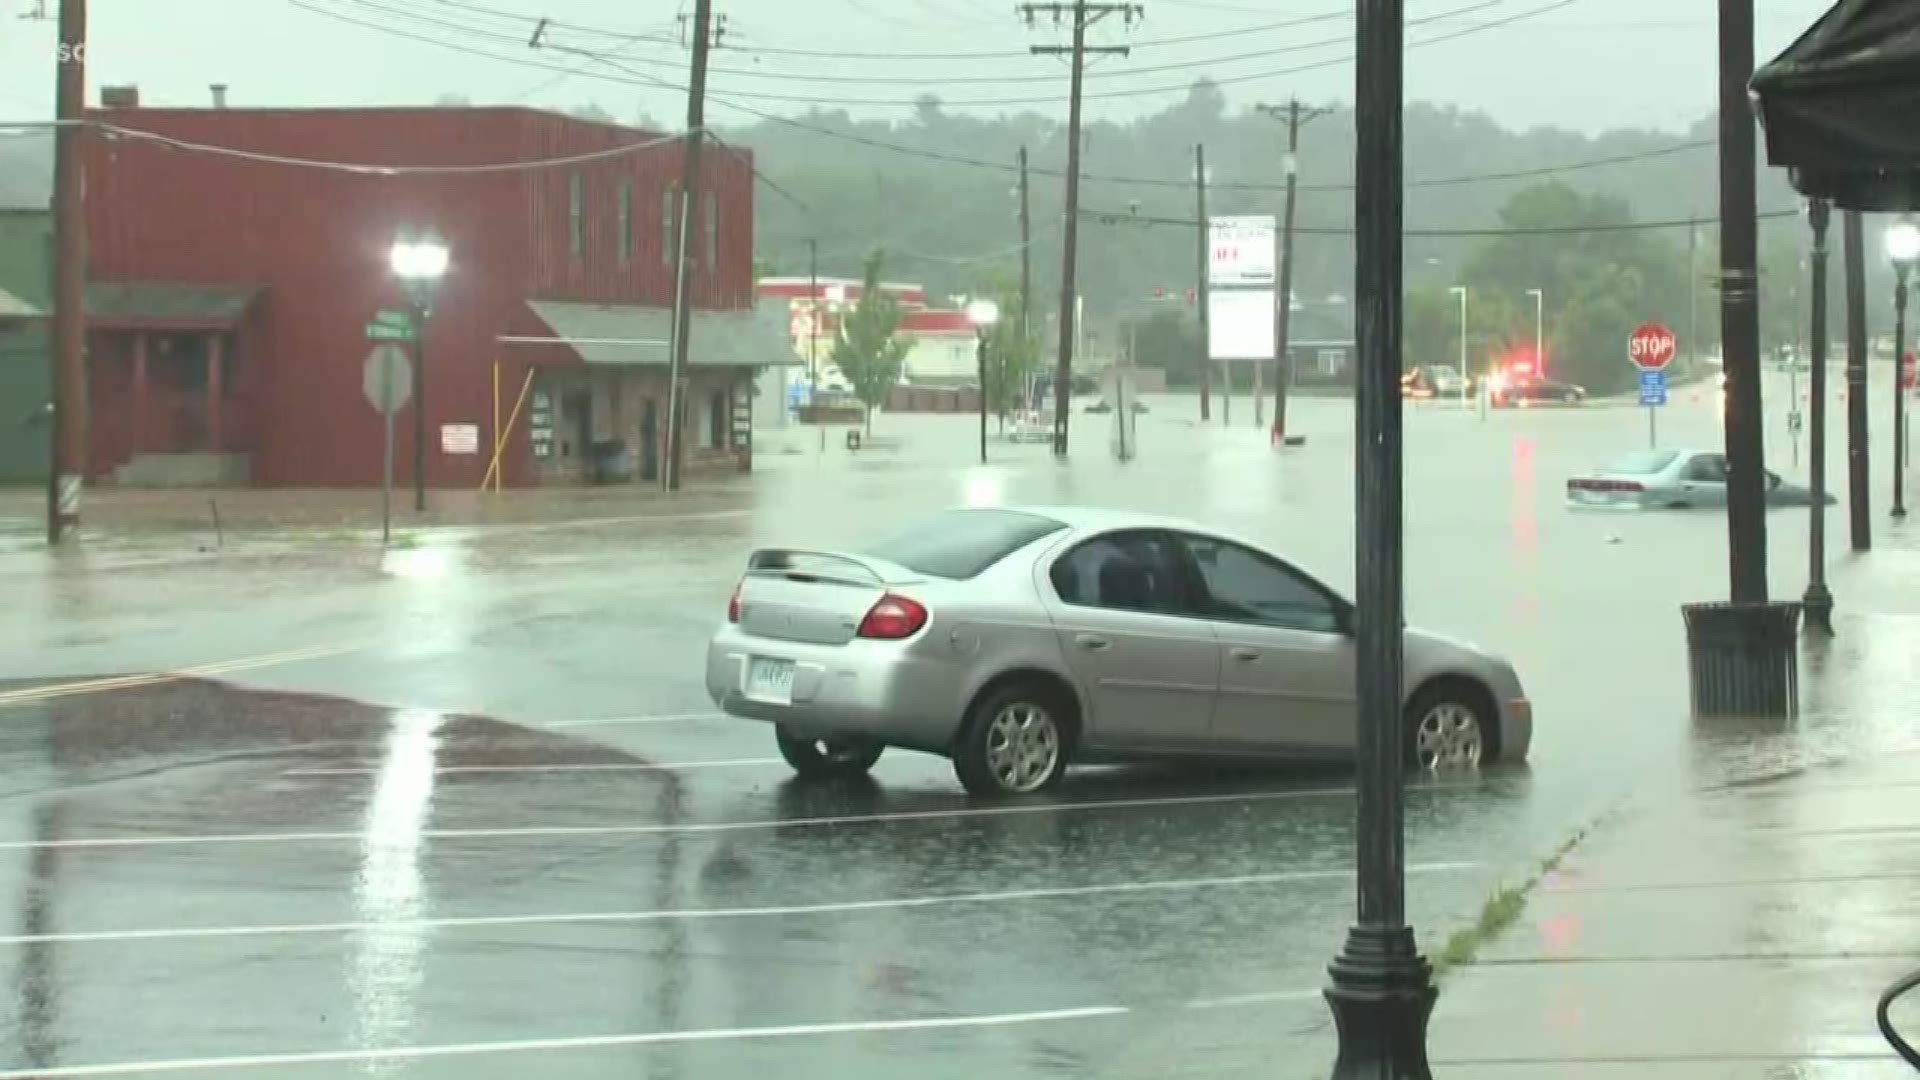 Several roads look like rivers in Eureka, Missouri, after heavy rain pushed through the area early Monday morning. The view from 5 On Your Side's Rhyan Henson showed at least two cars in deep water. The water is almost up to the bottom of the window of one of the cars.